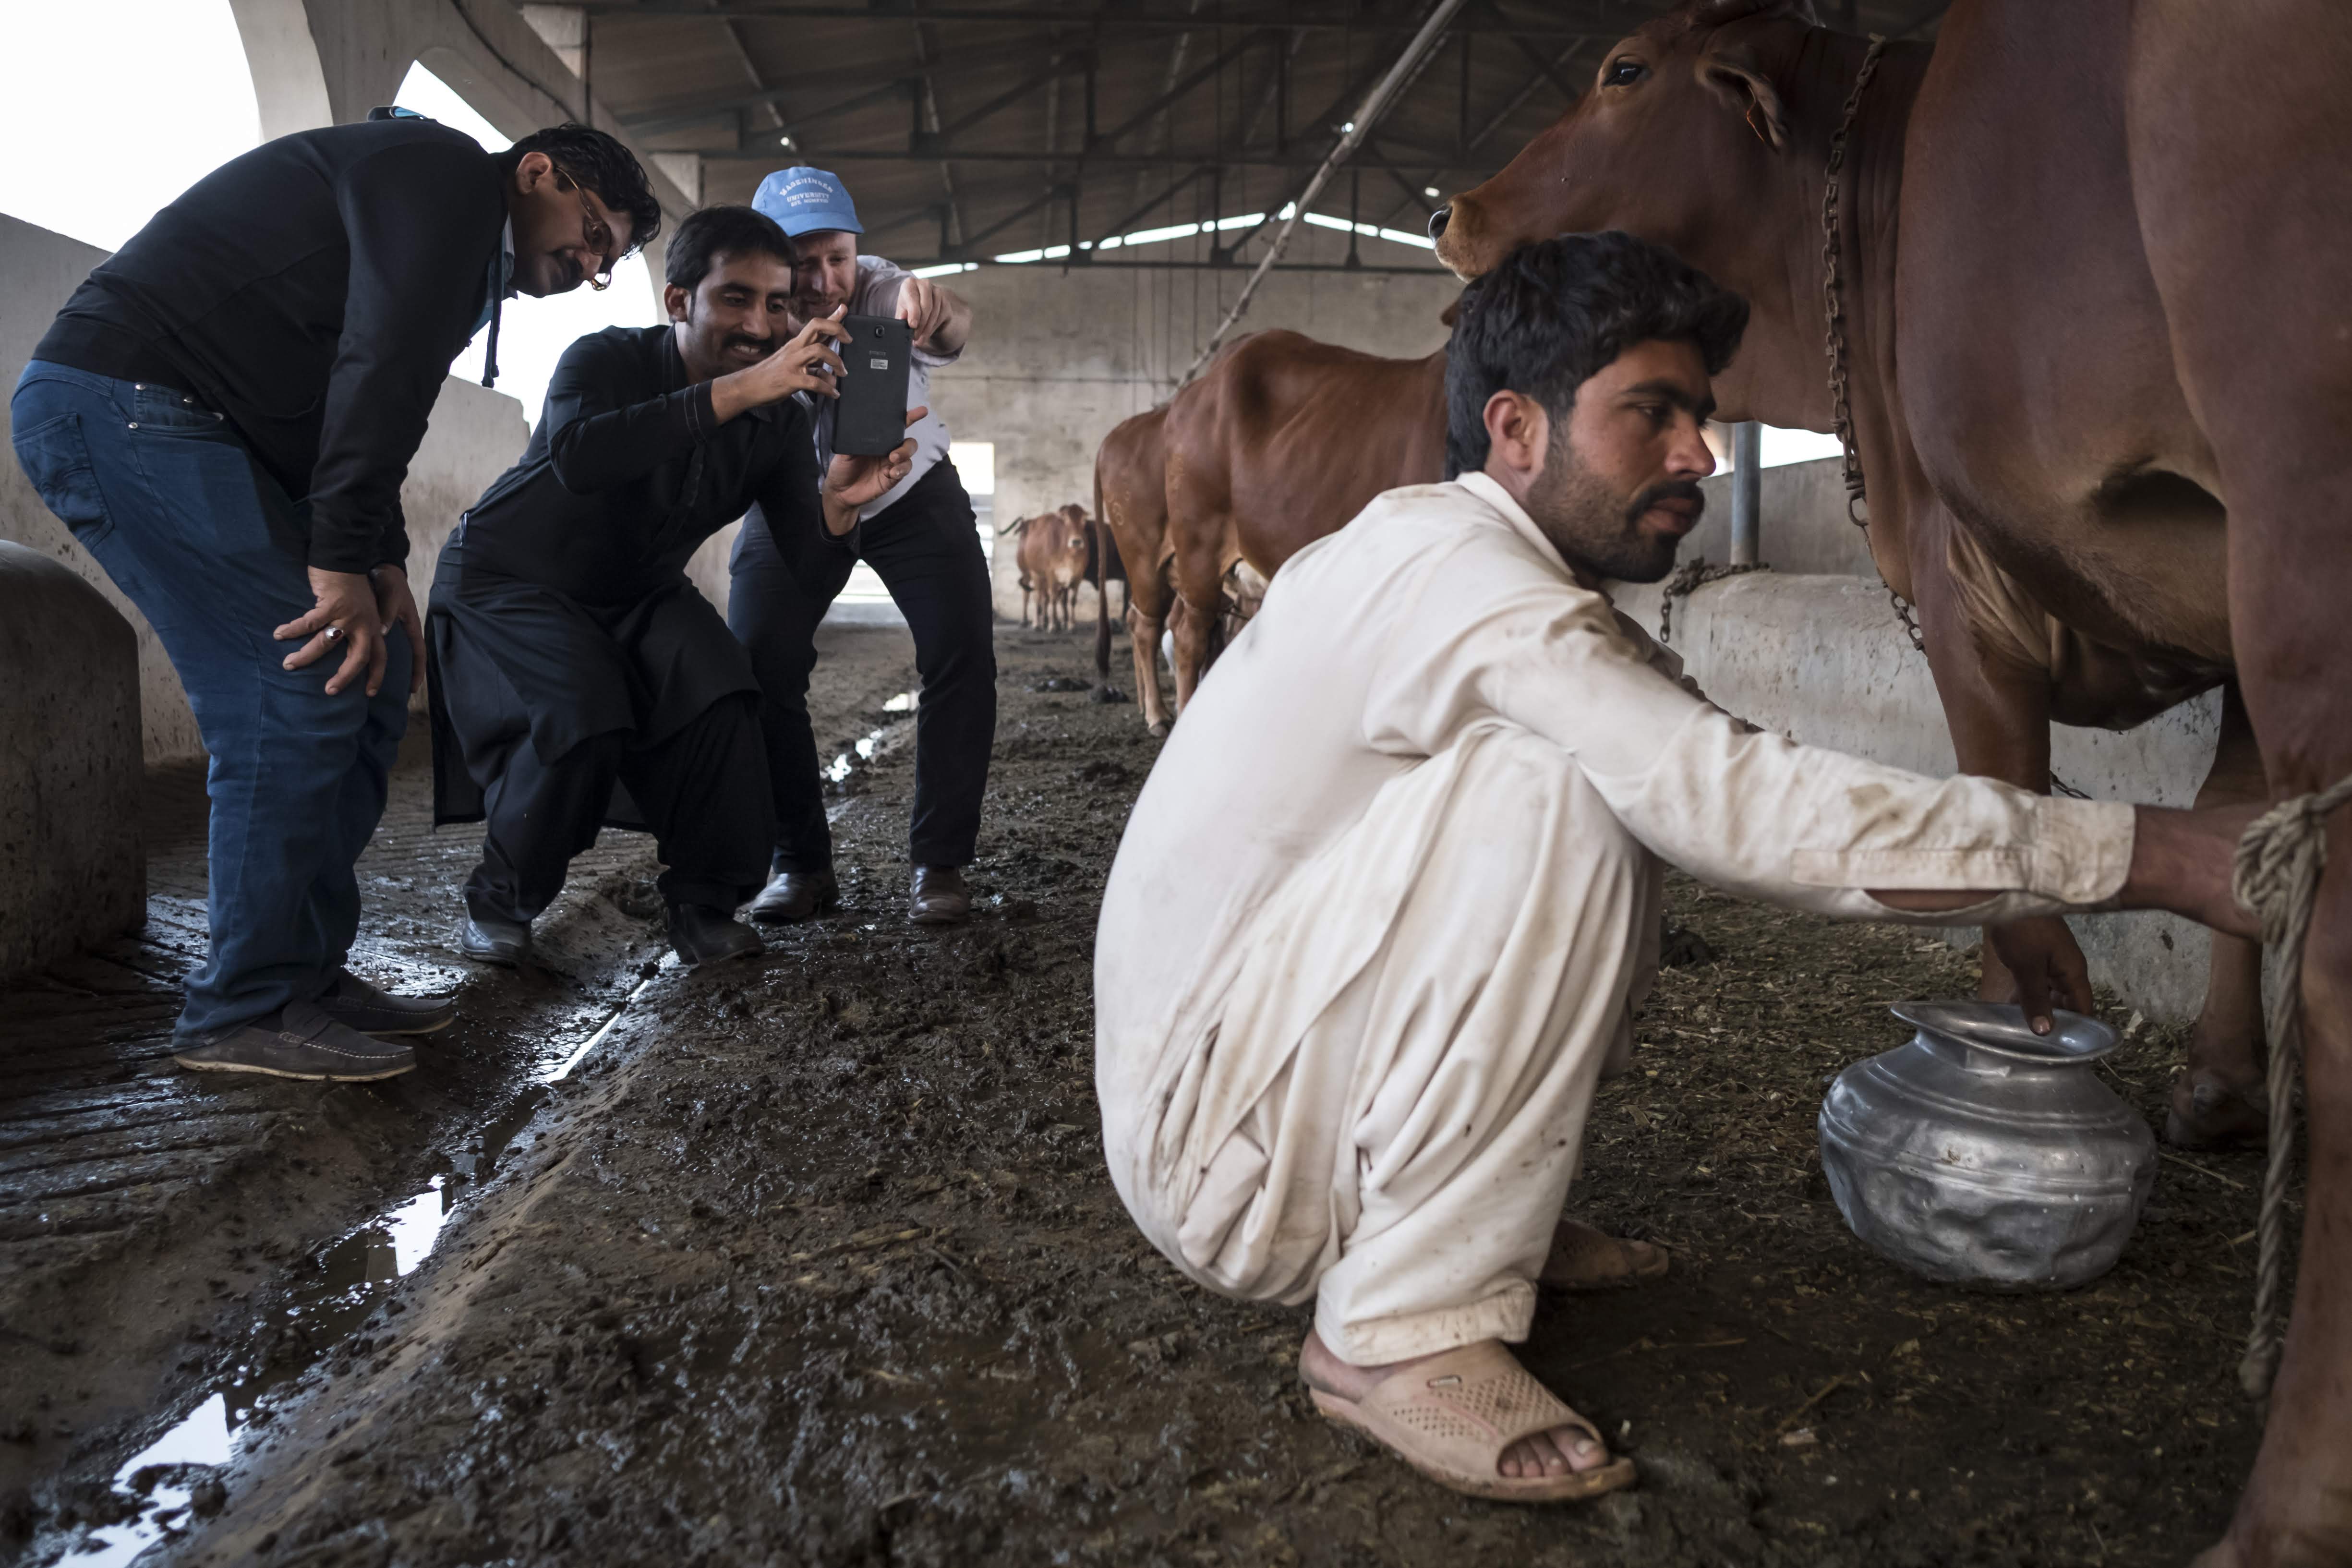 Abdul Aziz, Hafeez Ullah and David McGill demonstrate how the commcare surveys on a tablet can be used within the AVCCR dairy beef project in Pakistan. In December 2016 AgImpact delivered training to the team members in Lahore, Pakistan. AgImpact is delivering a Short Research Assignment for ACIAR exploring the uptake of using apps on tablets for agricultural research.